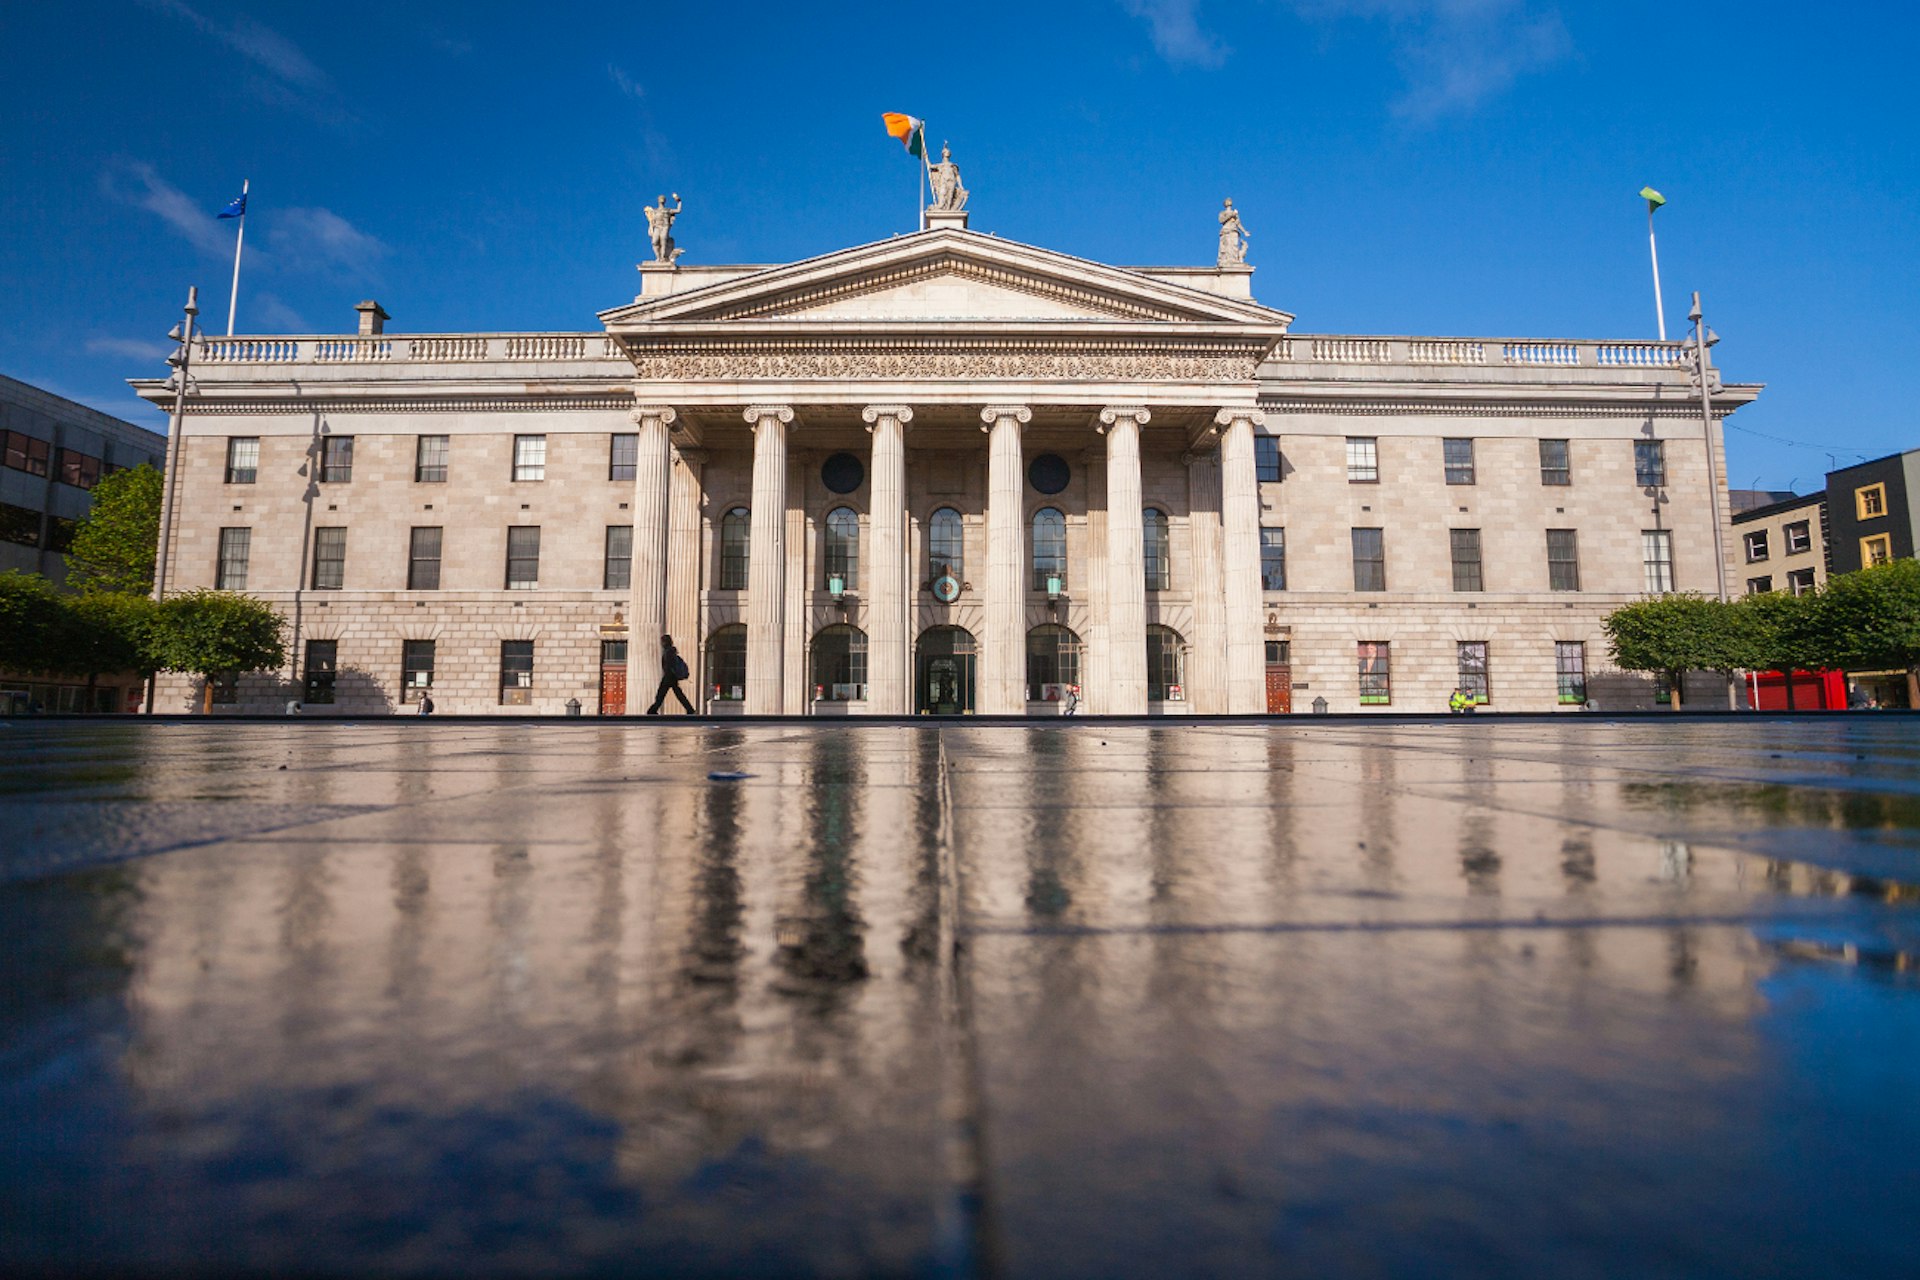 The GPO still bears shrapnel scars from 1916. Image by David Soanes / Moment/ Getty